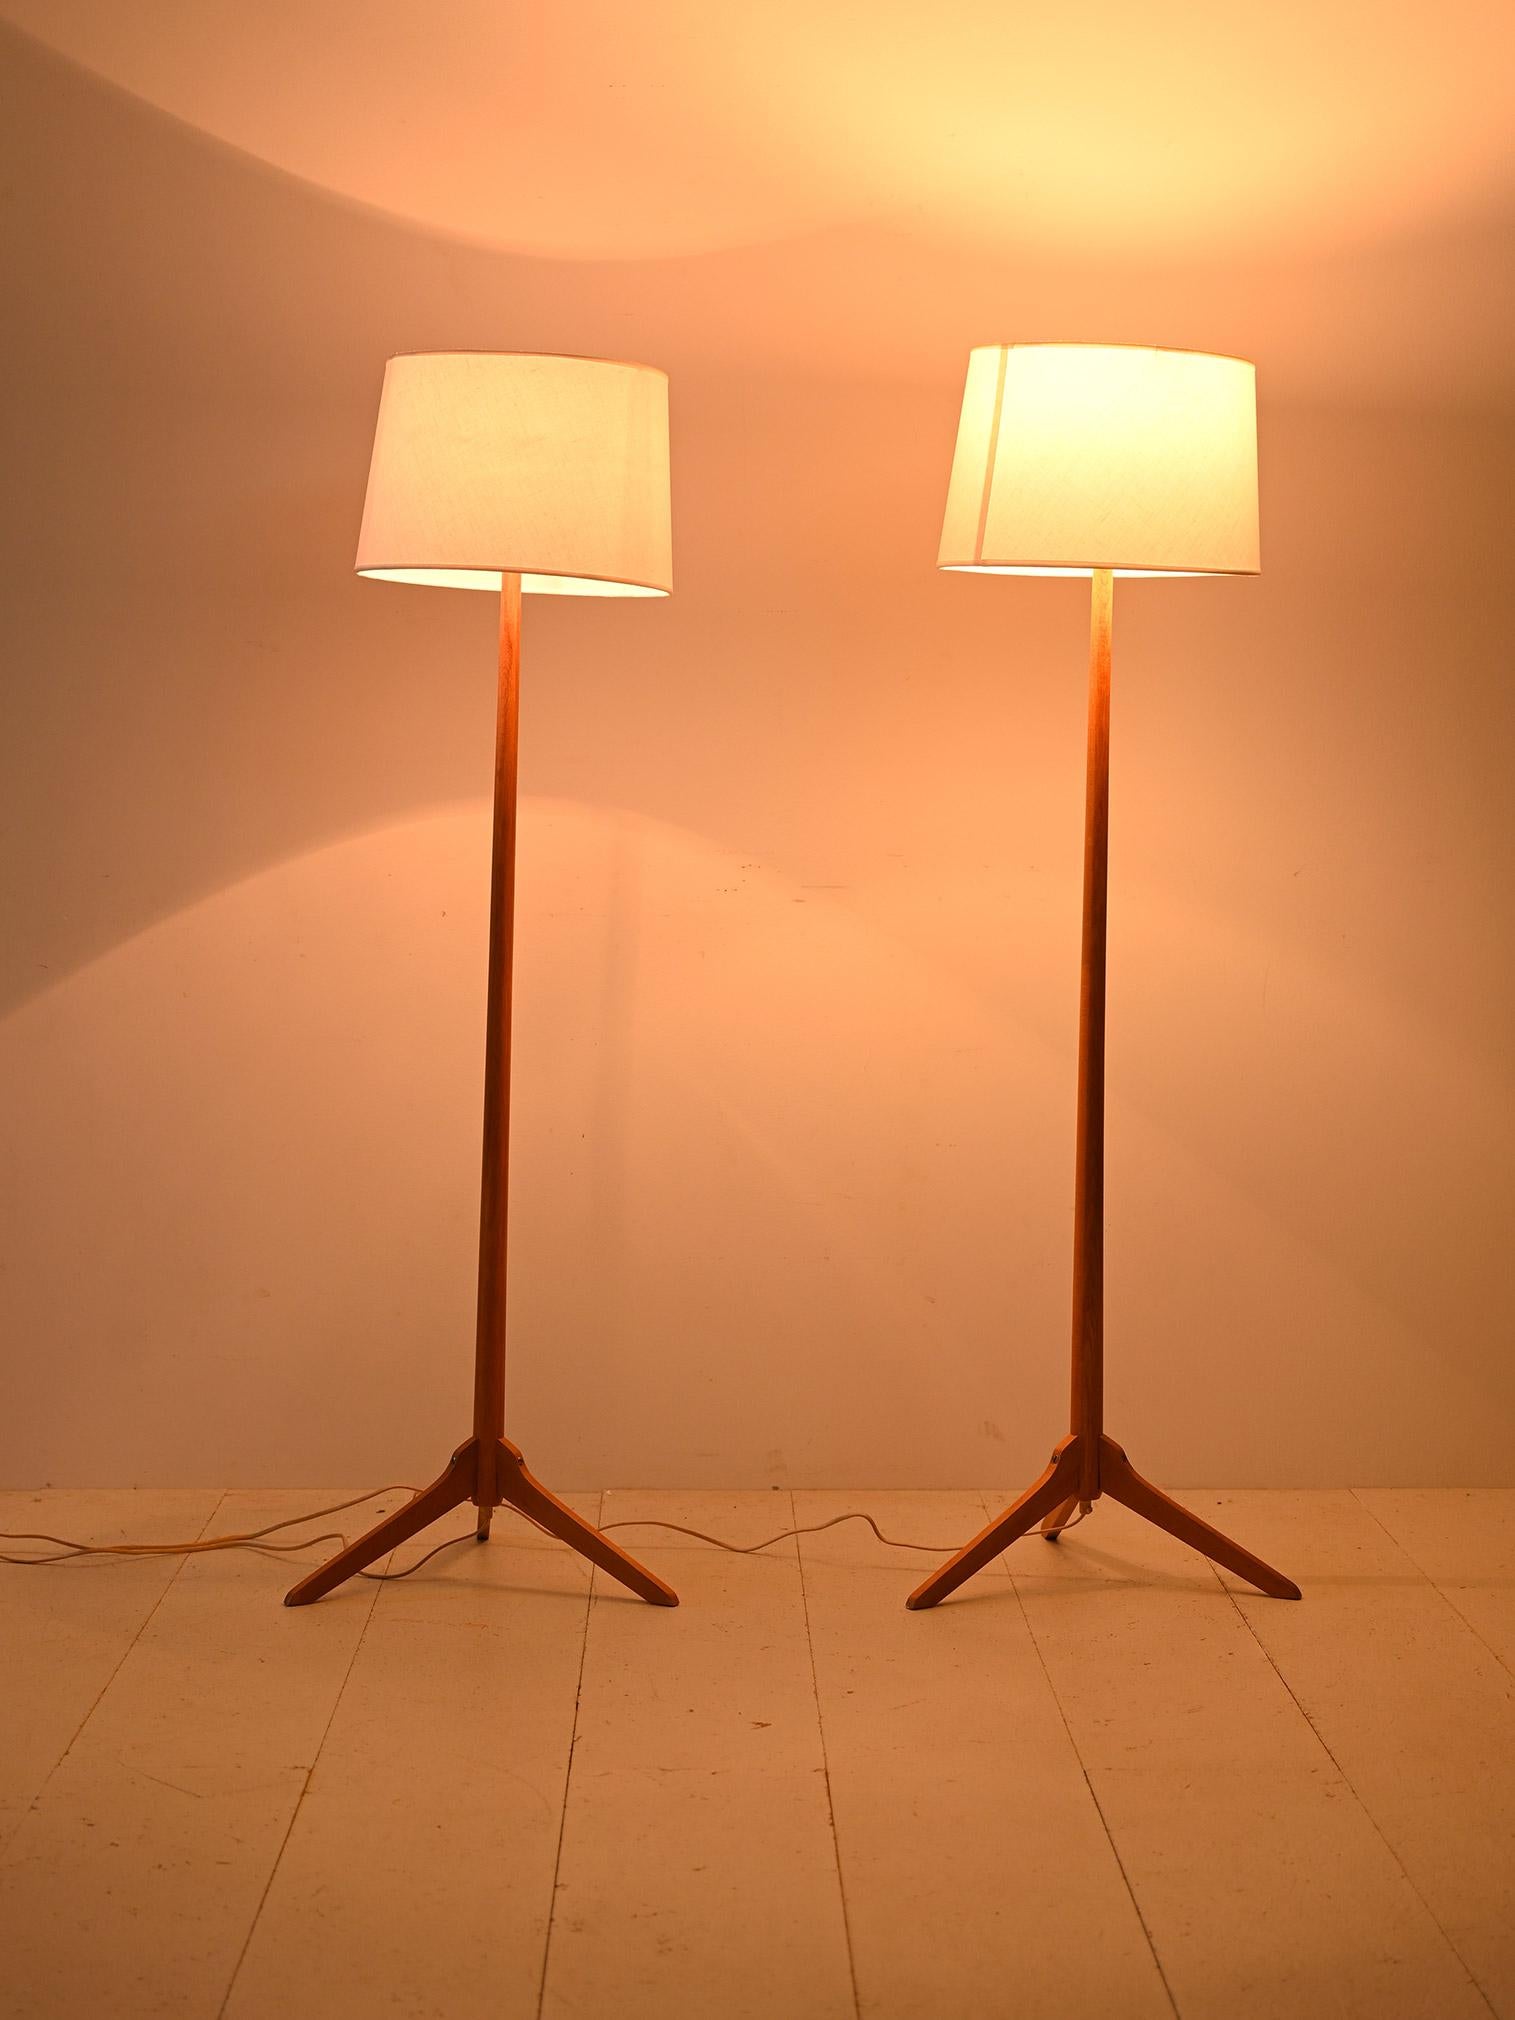 These charming pair of floor lamps represent the elegance and simplicity of Nordic design. The oak frame with V-shaped legs adds a touch of originality and sophistication, while the white fabric lampshade lends a cozy and bright